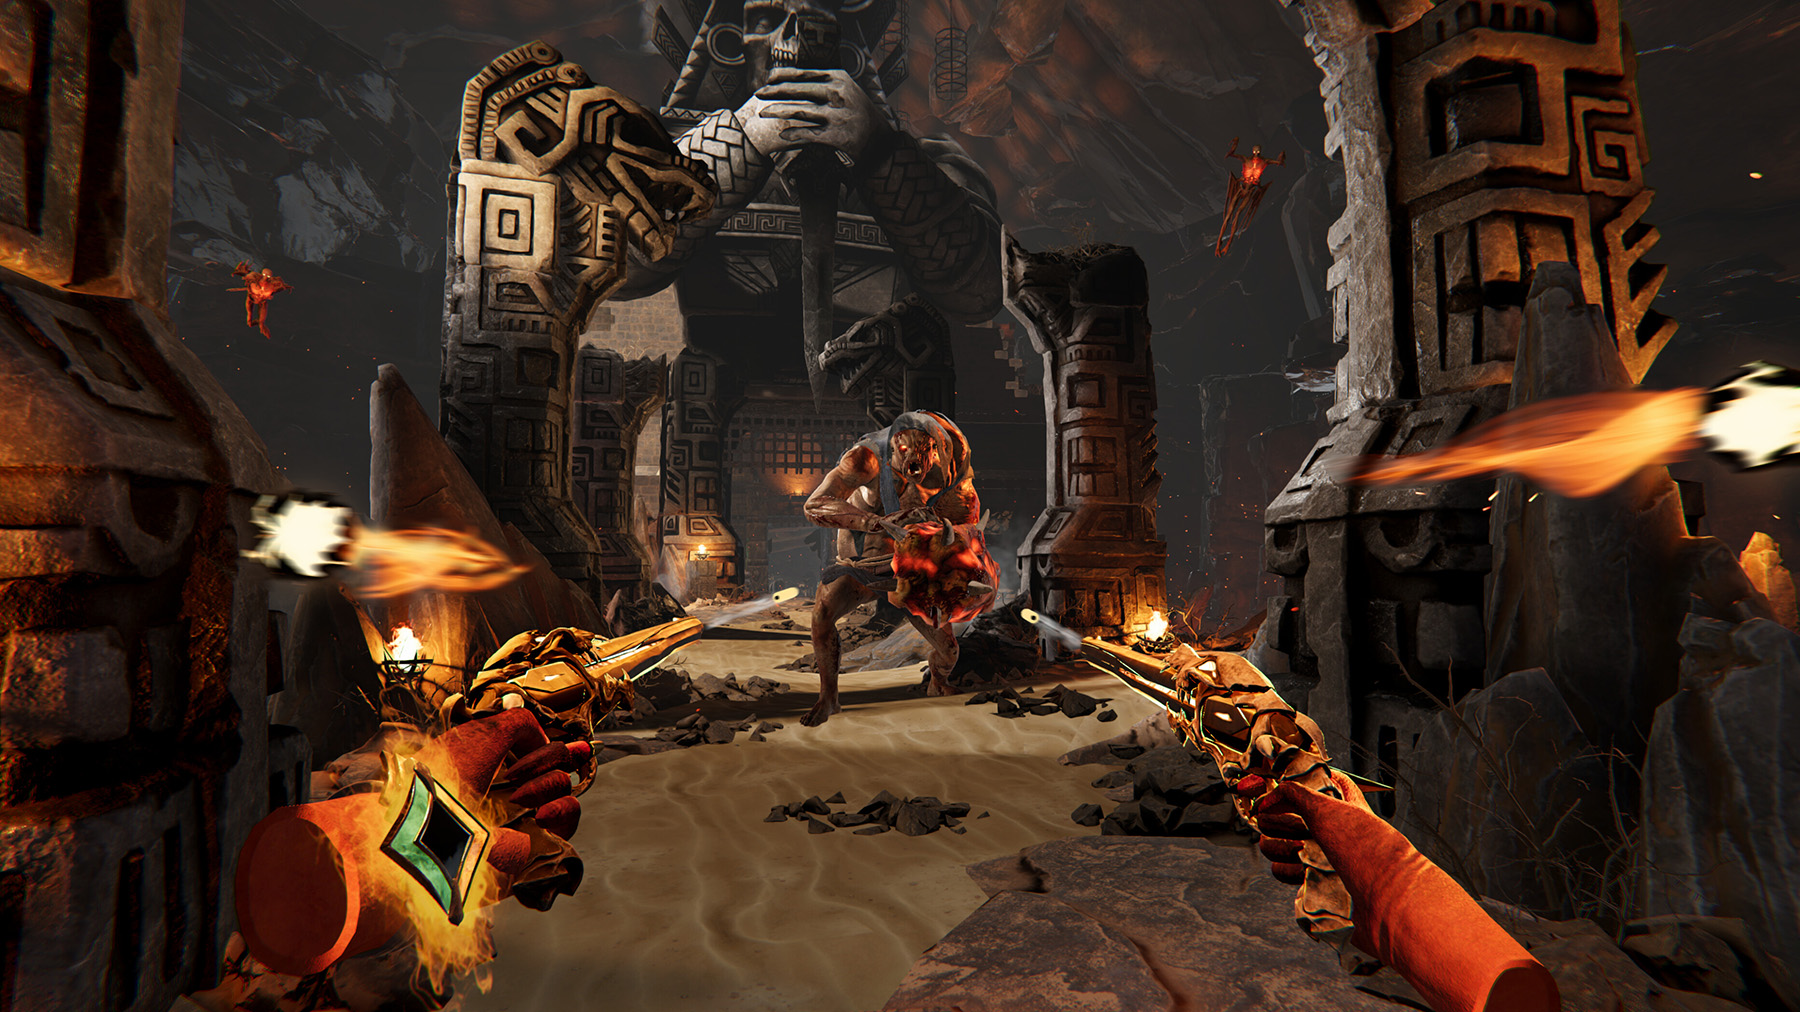 Strap your Quest on tightly, Metal: Hellsinger is going to get you headbanging in VR